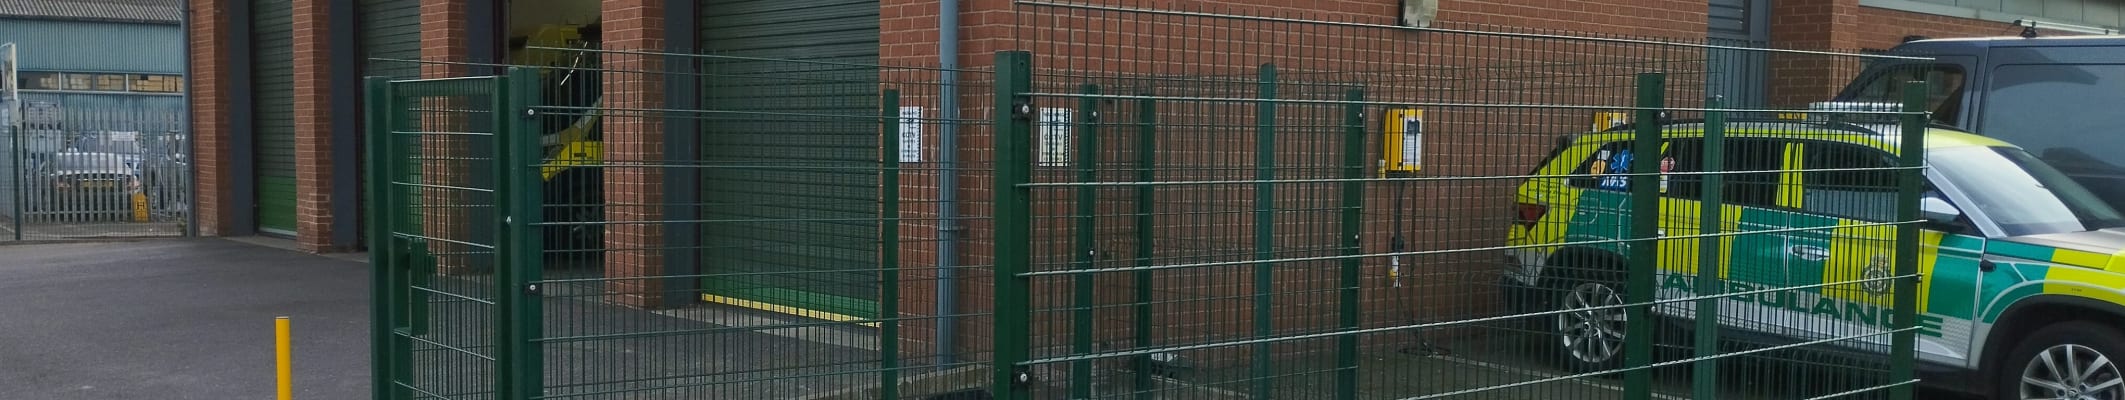 Security Fencing at Yorkshire NHS Ambulance Service